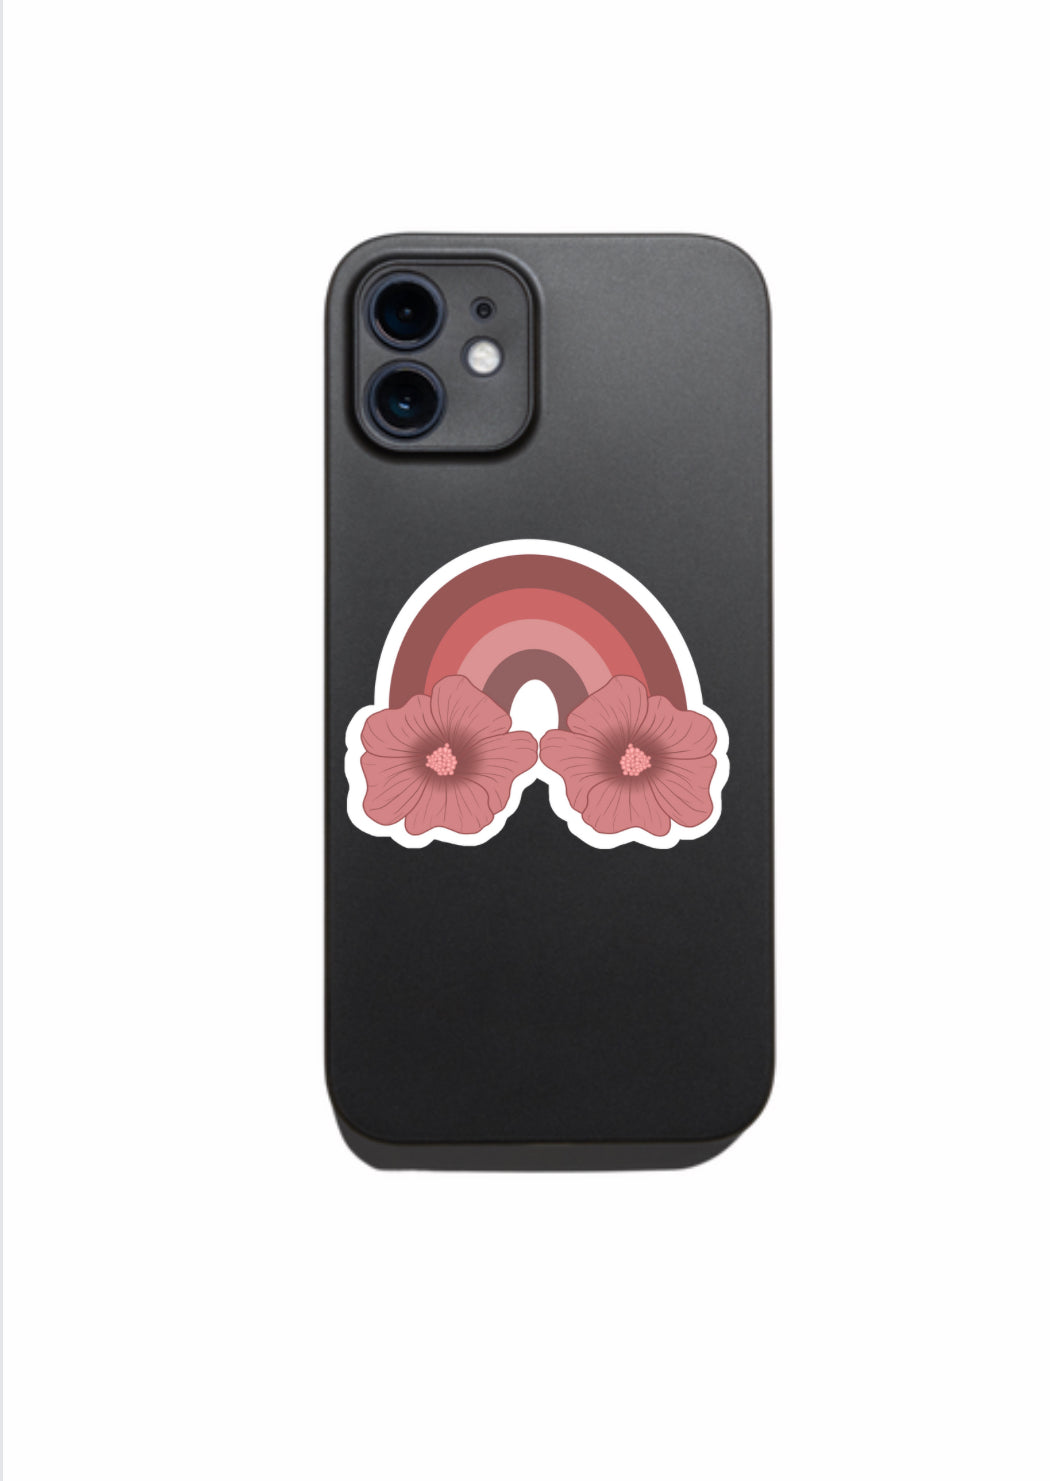 PUA RAINBOW PHONE GRIP OR BADGE HOLDER (COMES IN TWO COLORS)